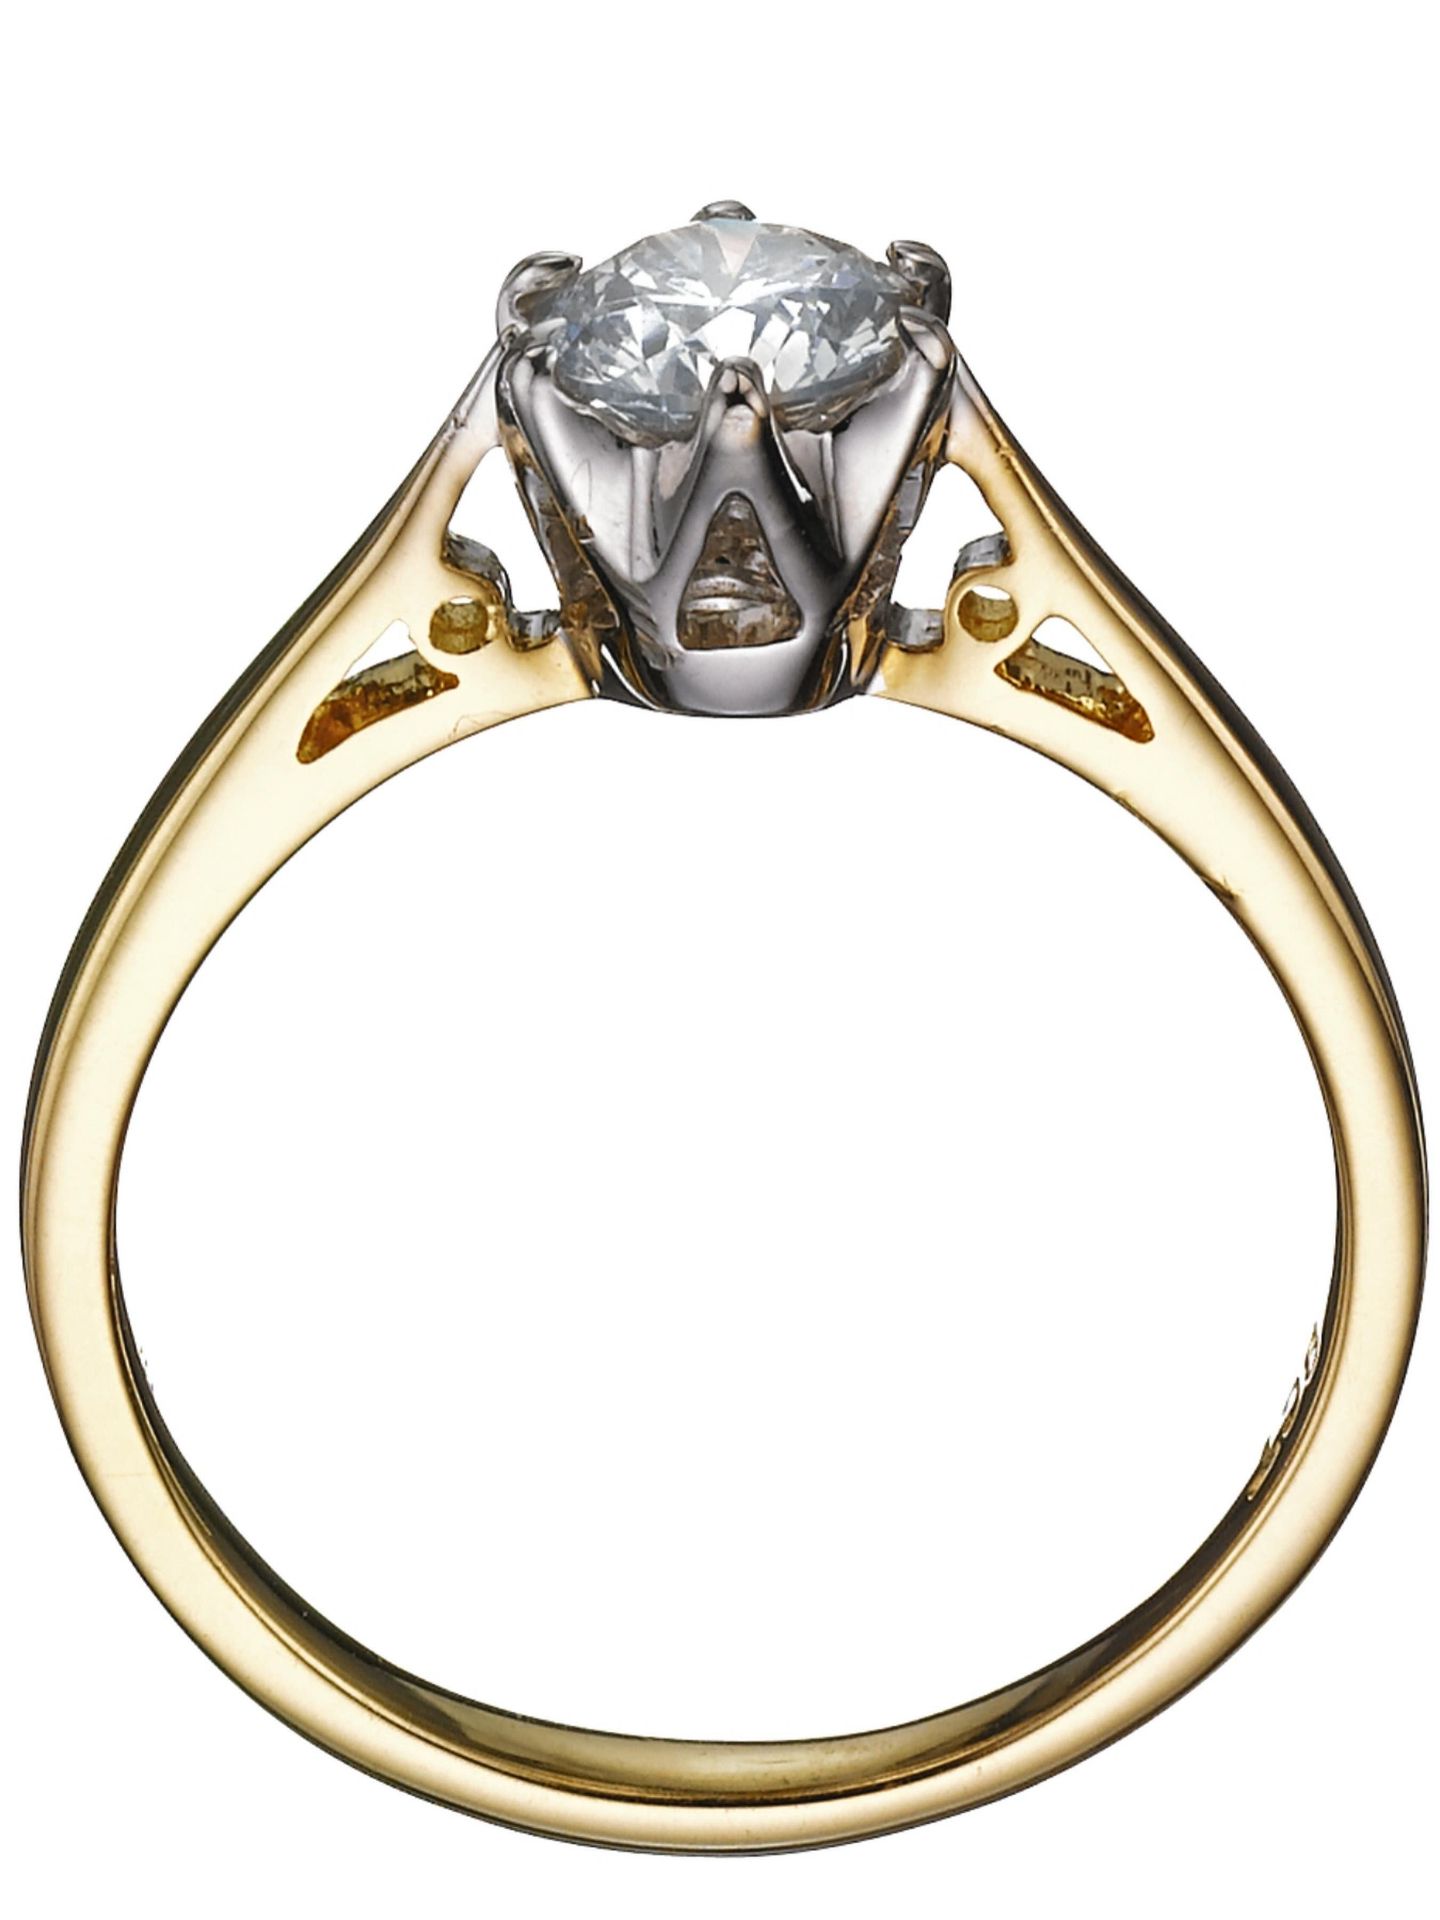 6 Claw Diamond Solitaire Engagement Ring Metal 9k - Image 3 of 3